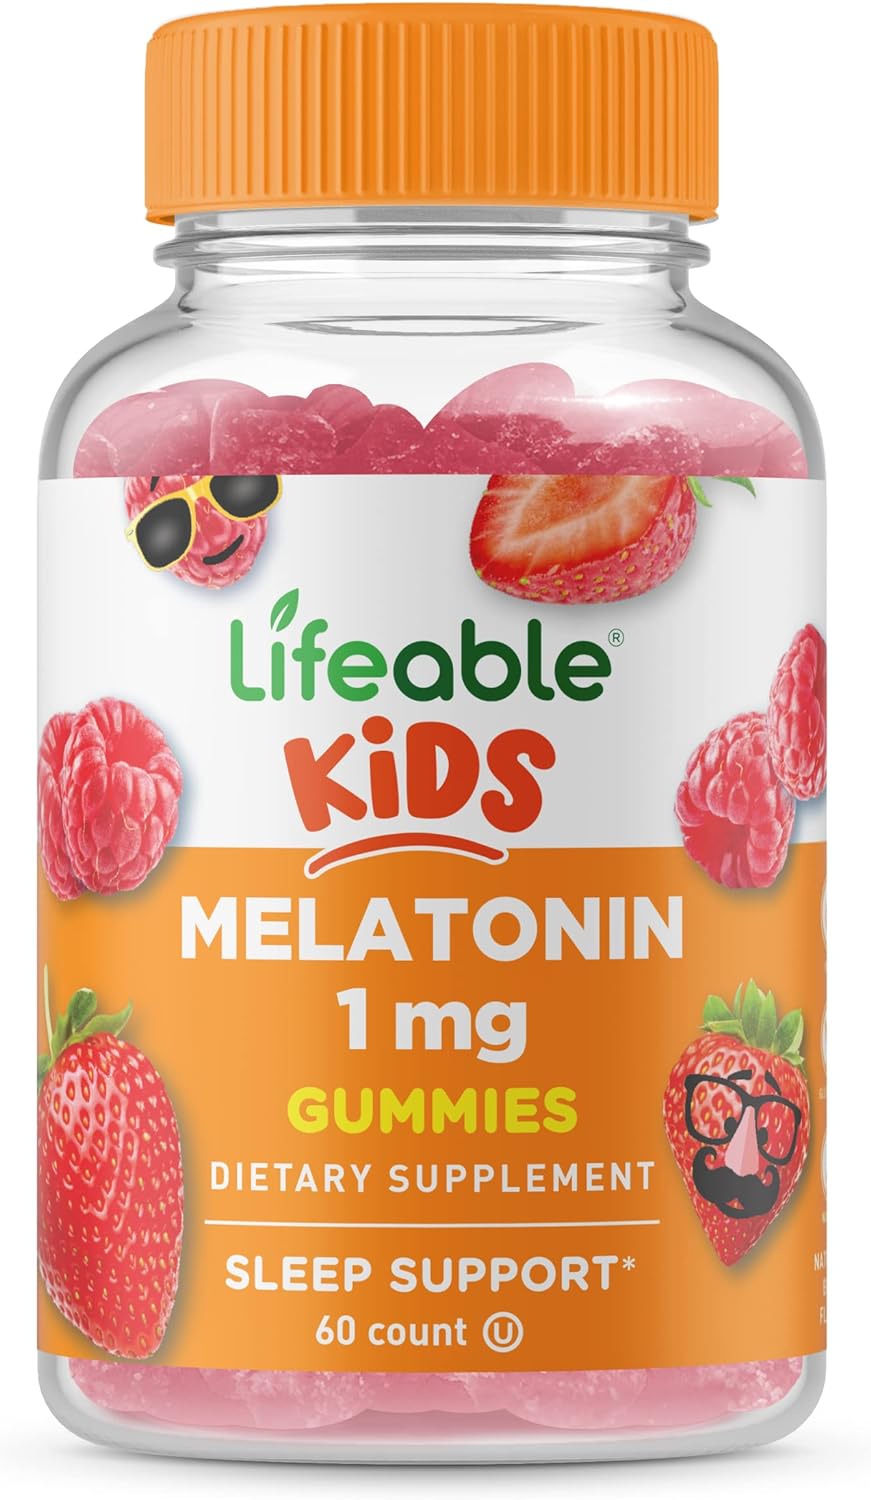 Lifeable Melatonin 1mg - Great Tasting Natural Flavor Gummy Supplement - Gluten Free Vegetarian GMO-Free Chewable - for Help Falling Asleep and Staying Sleep - for Kids, Teen and Toddler - 60 Gummies